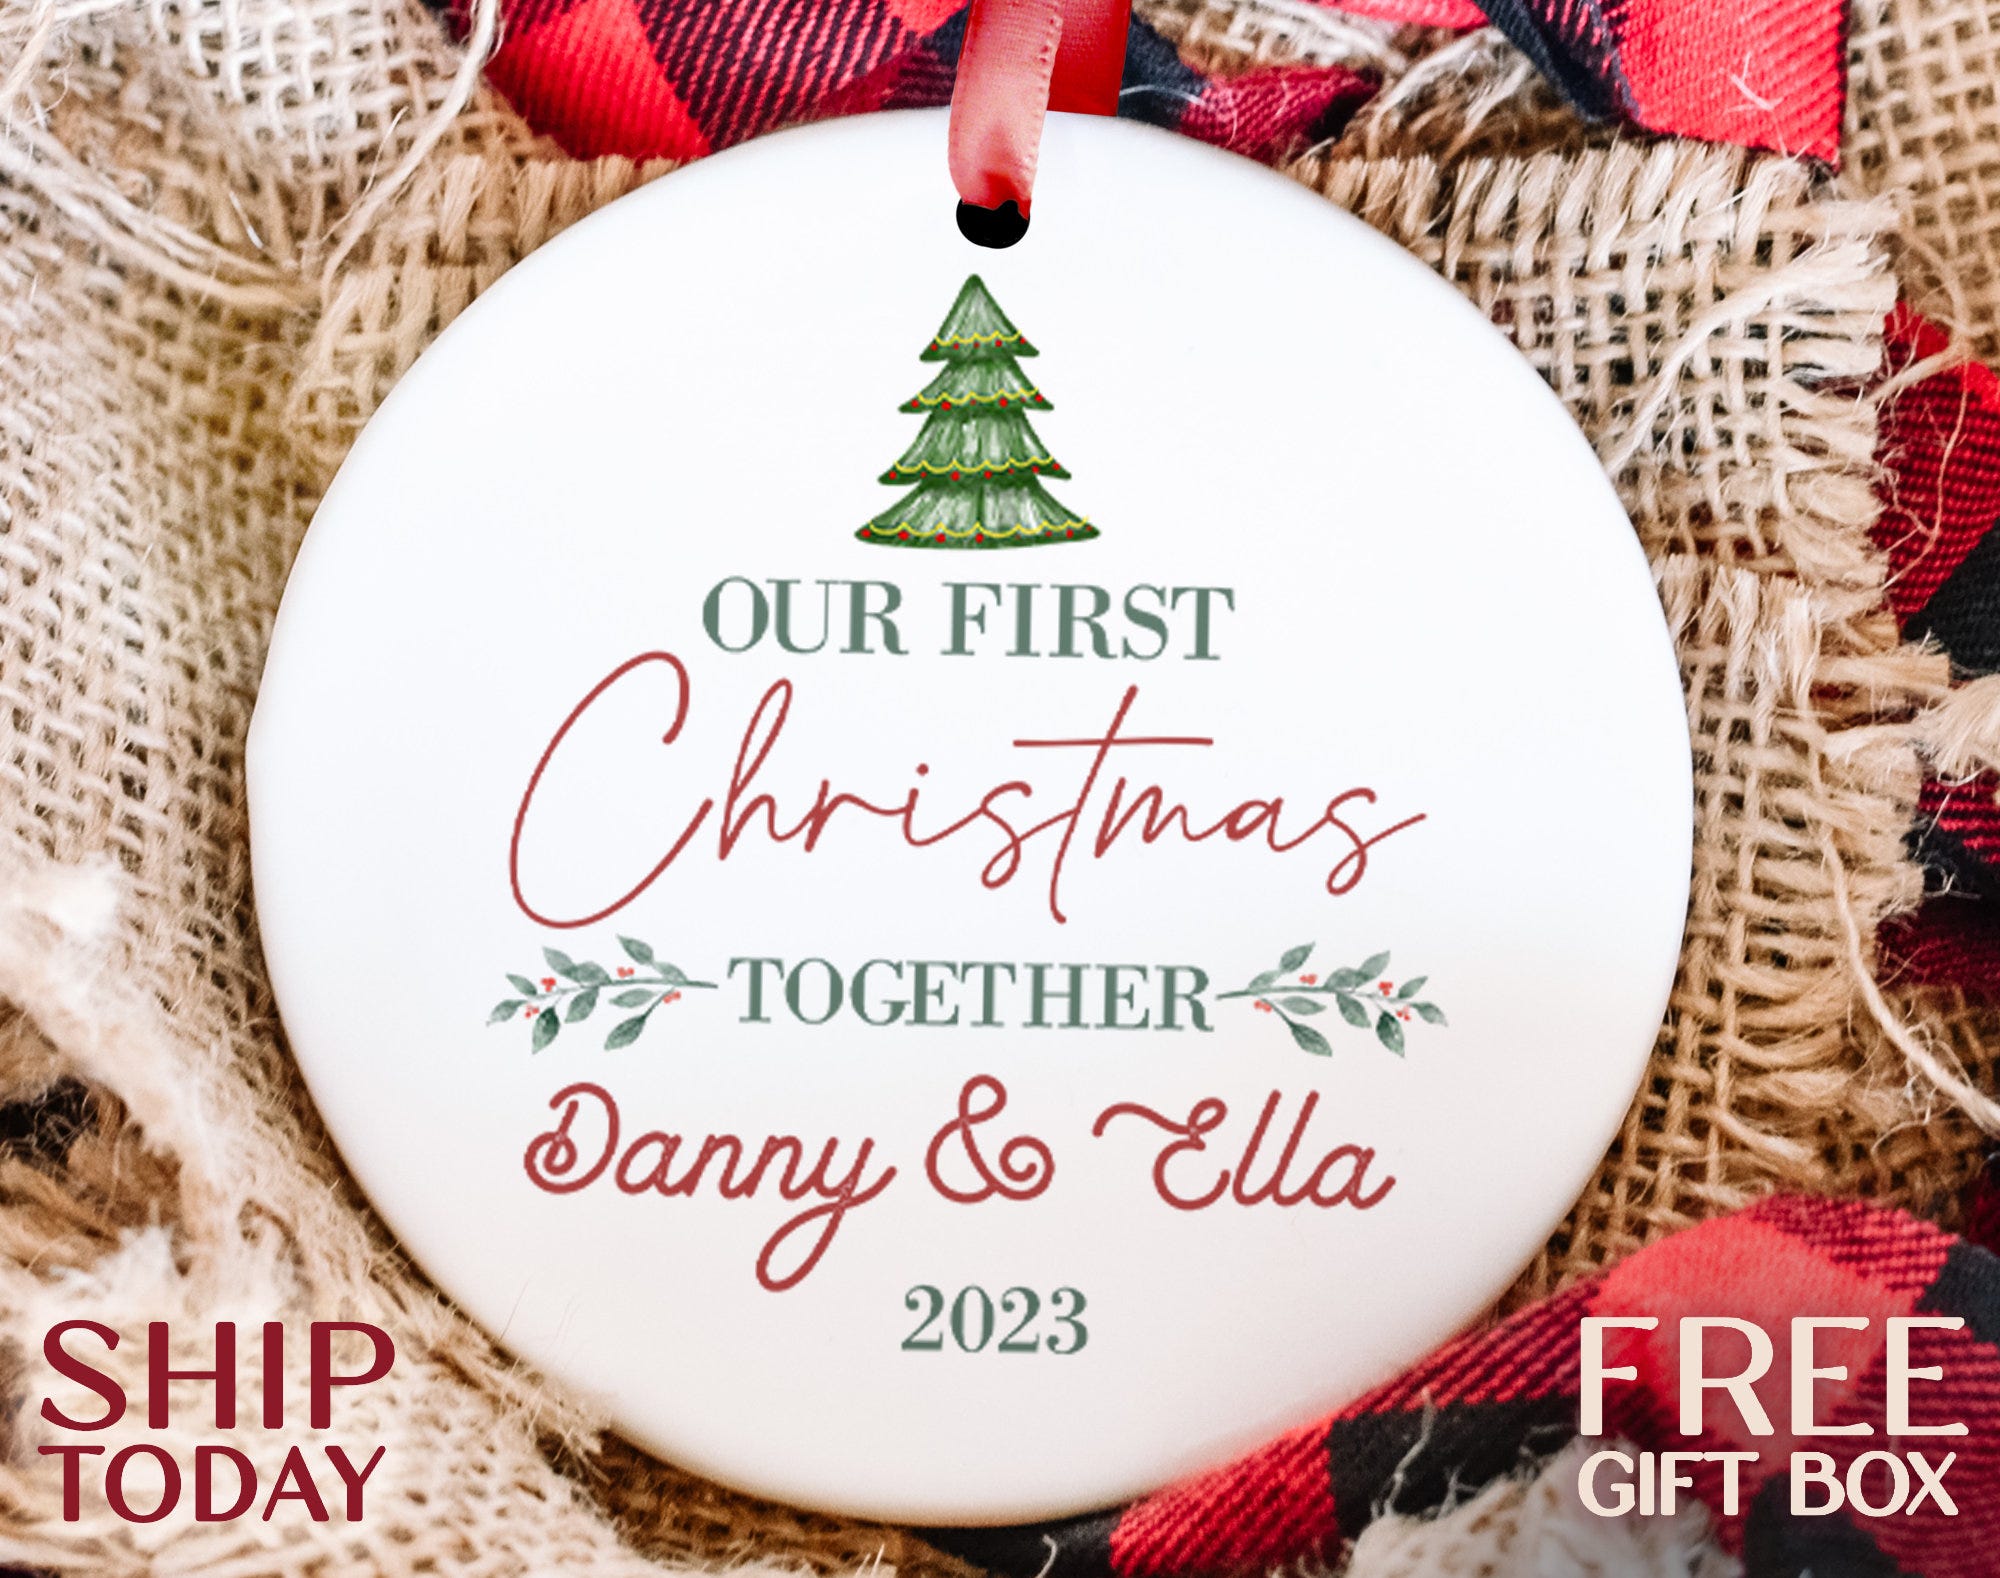 Our First Christmas Together Ornament, Personalized Christmas Ornament For Newlyweds, Couple Ornament, Holiday Gift